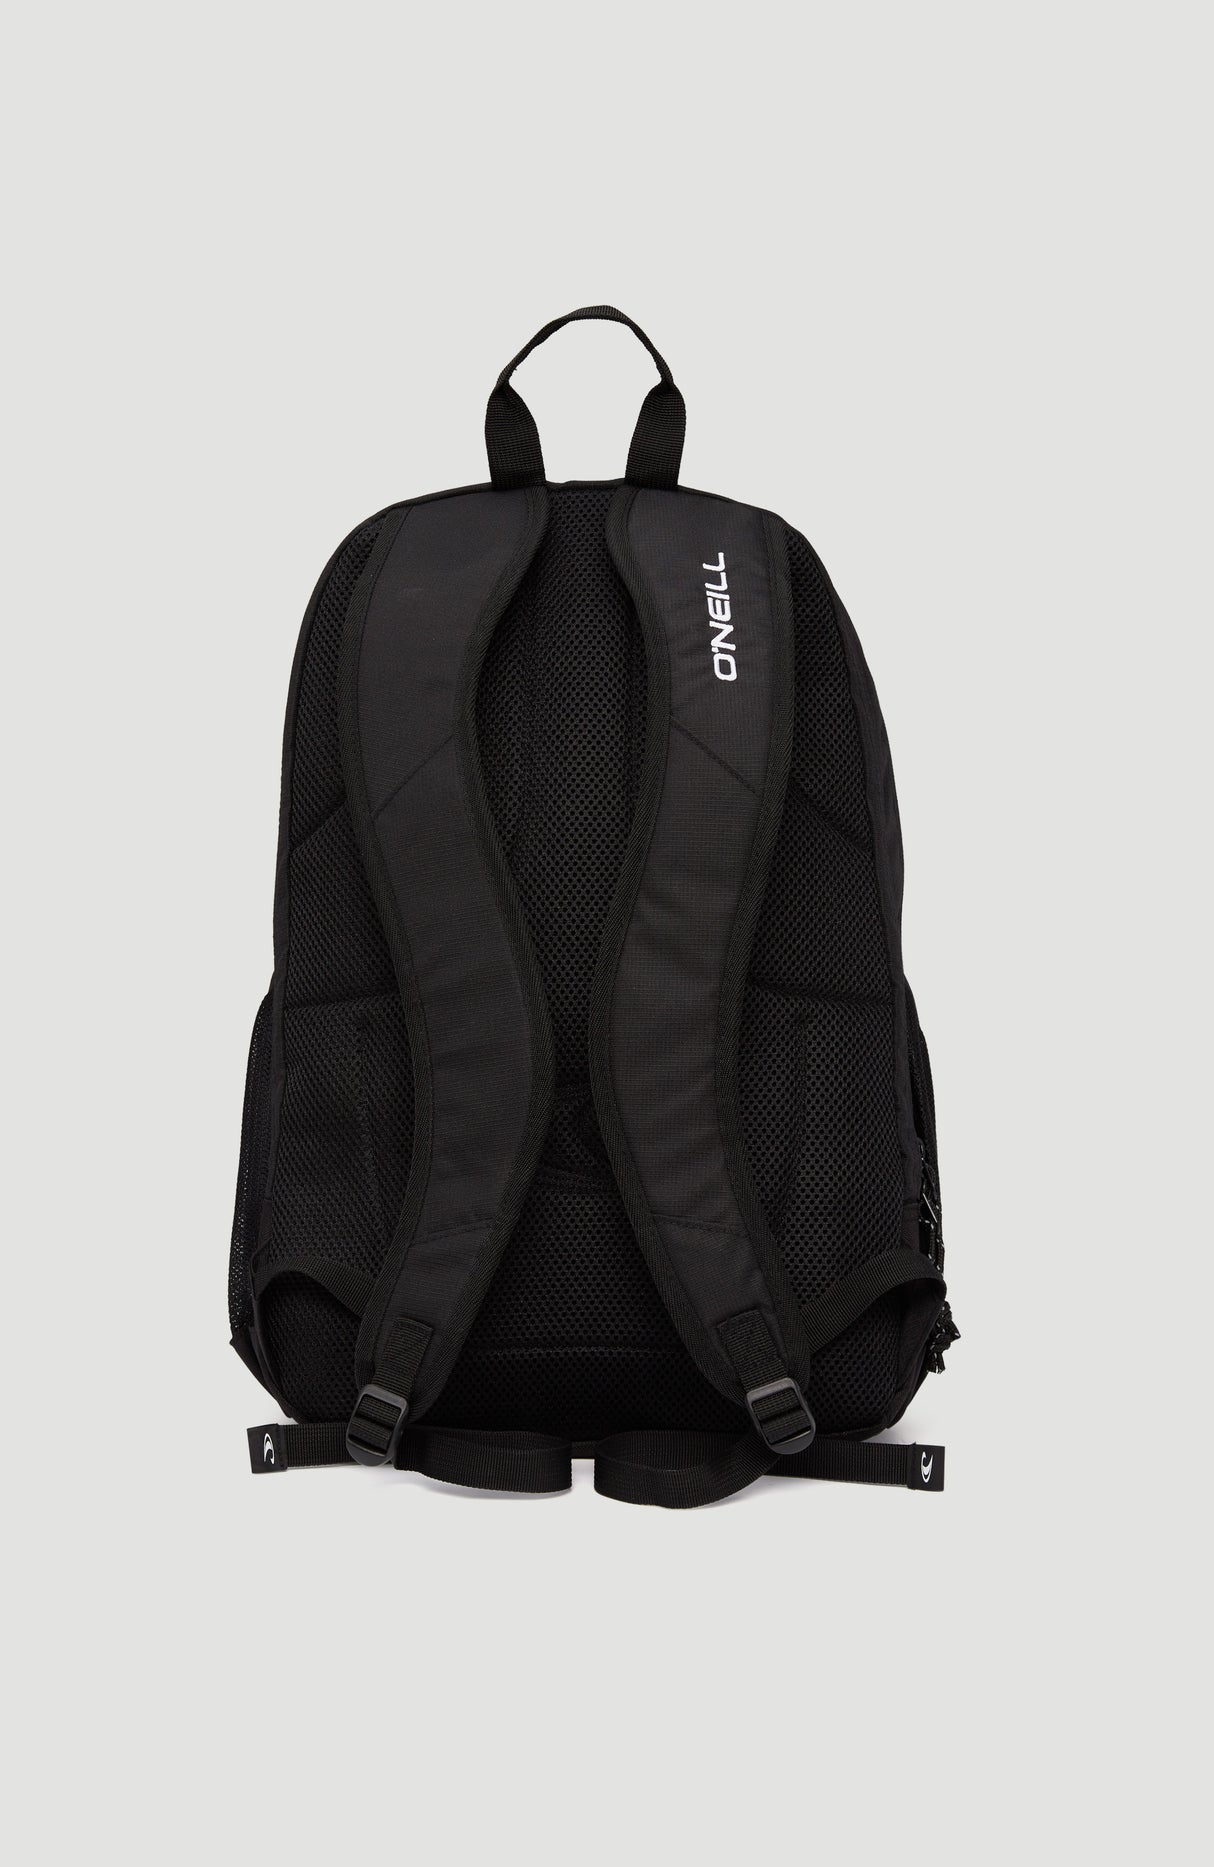 MOCHILA - WEDGE BACKPACK 25L - BLACK OUT - INVIERNO 2023